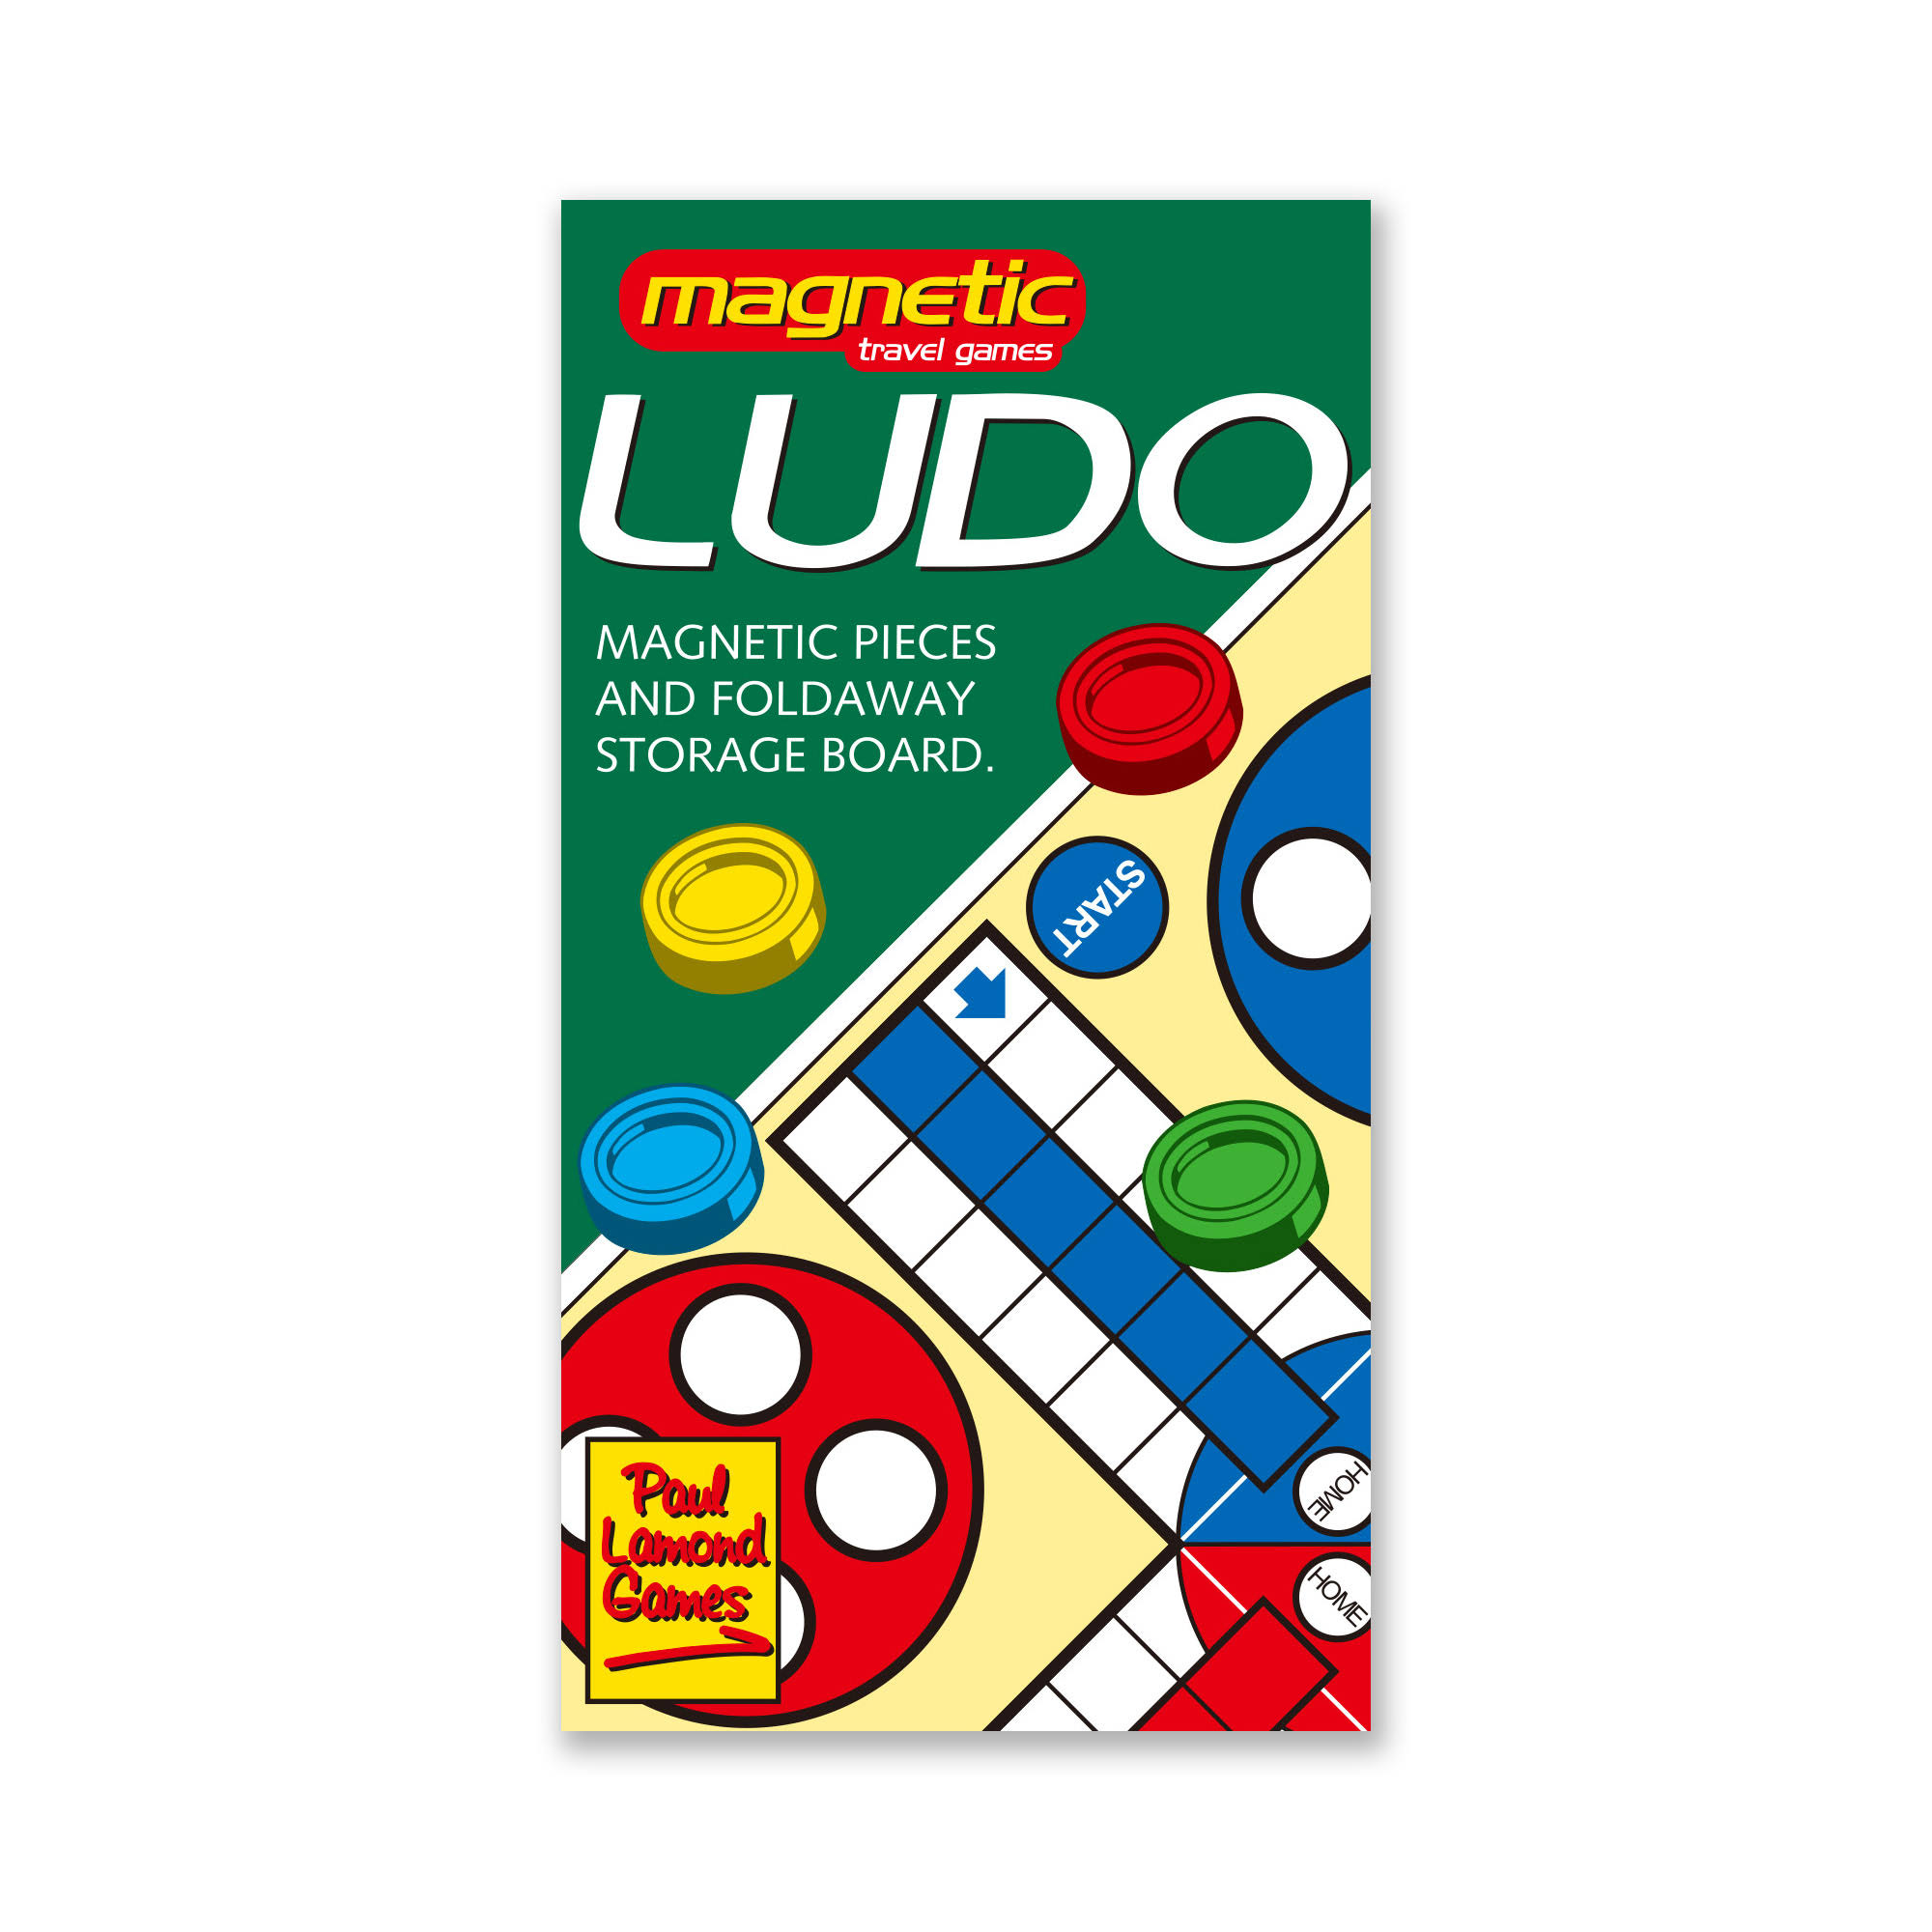 Ludo Magnetic Travel Game